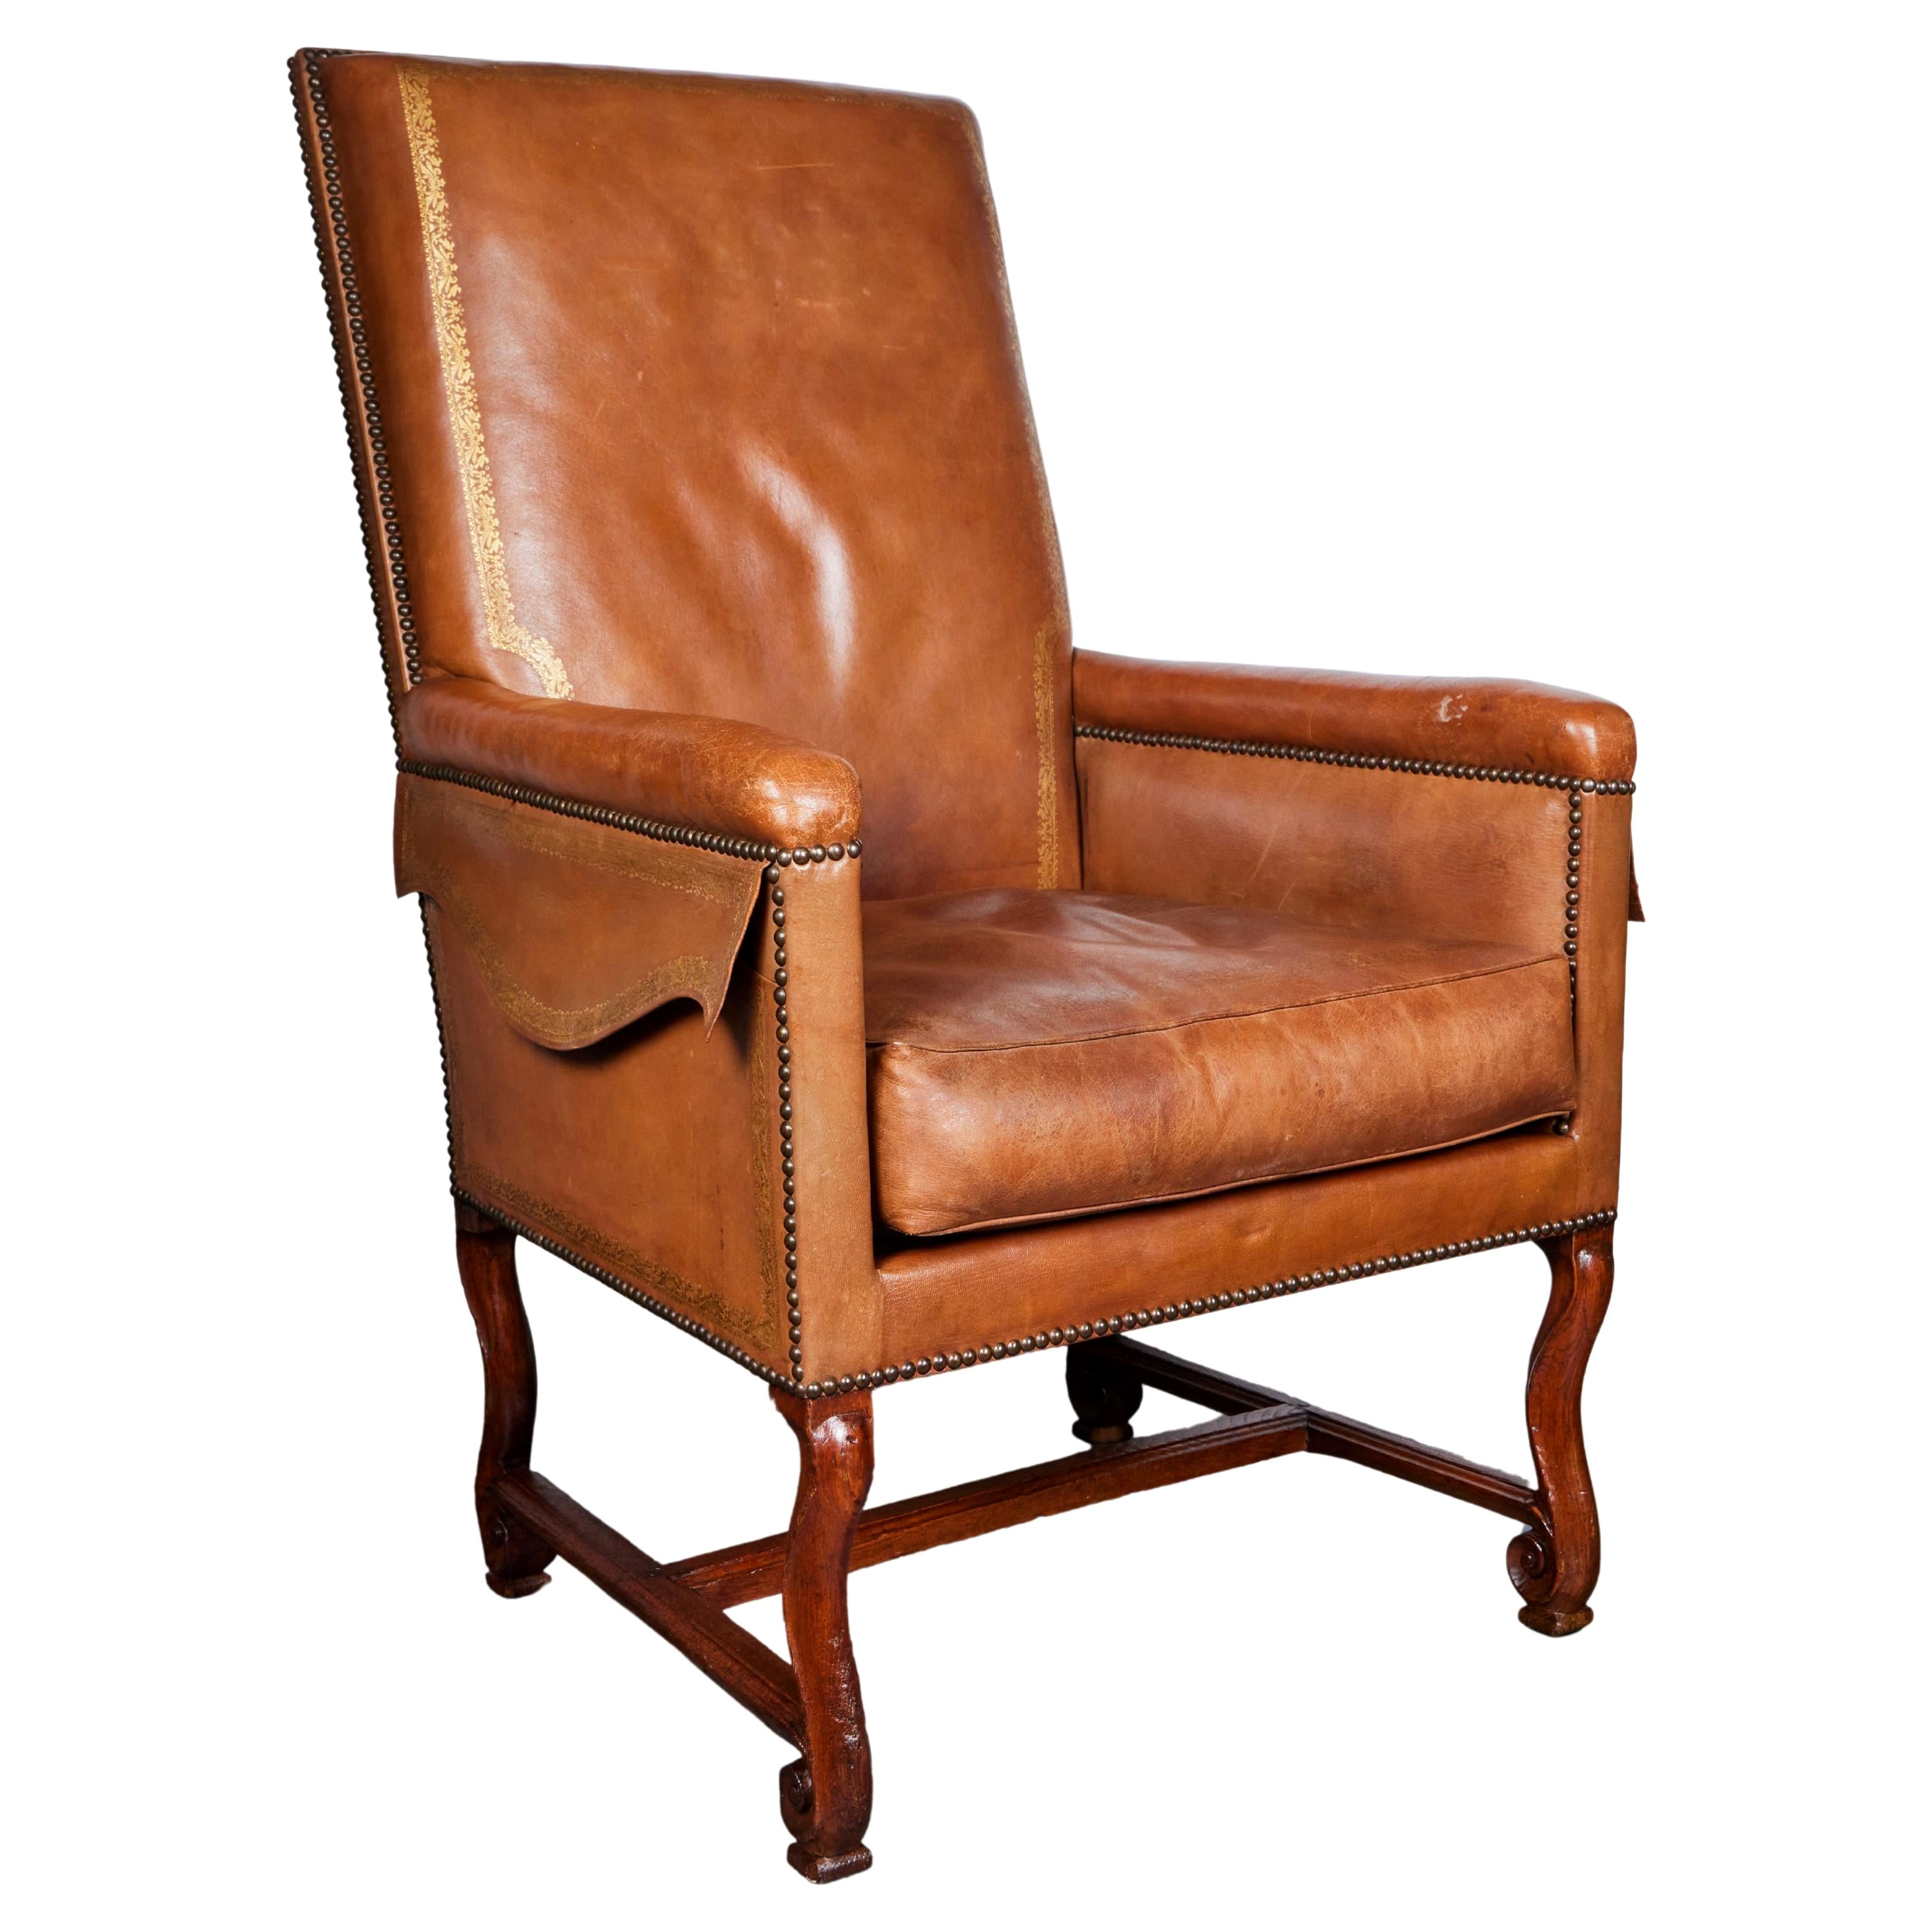 Antique Walnut and Leather Armchair